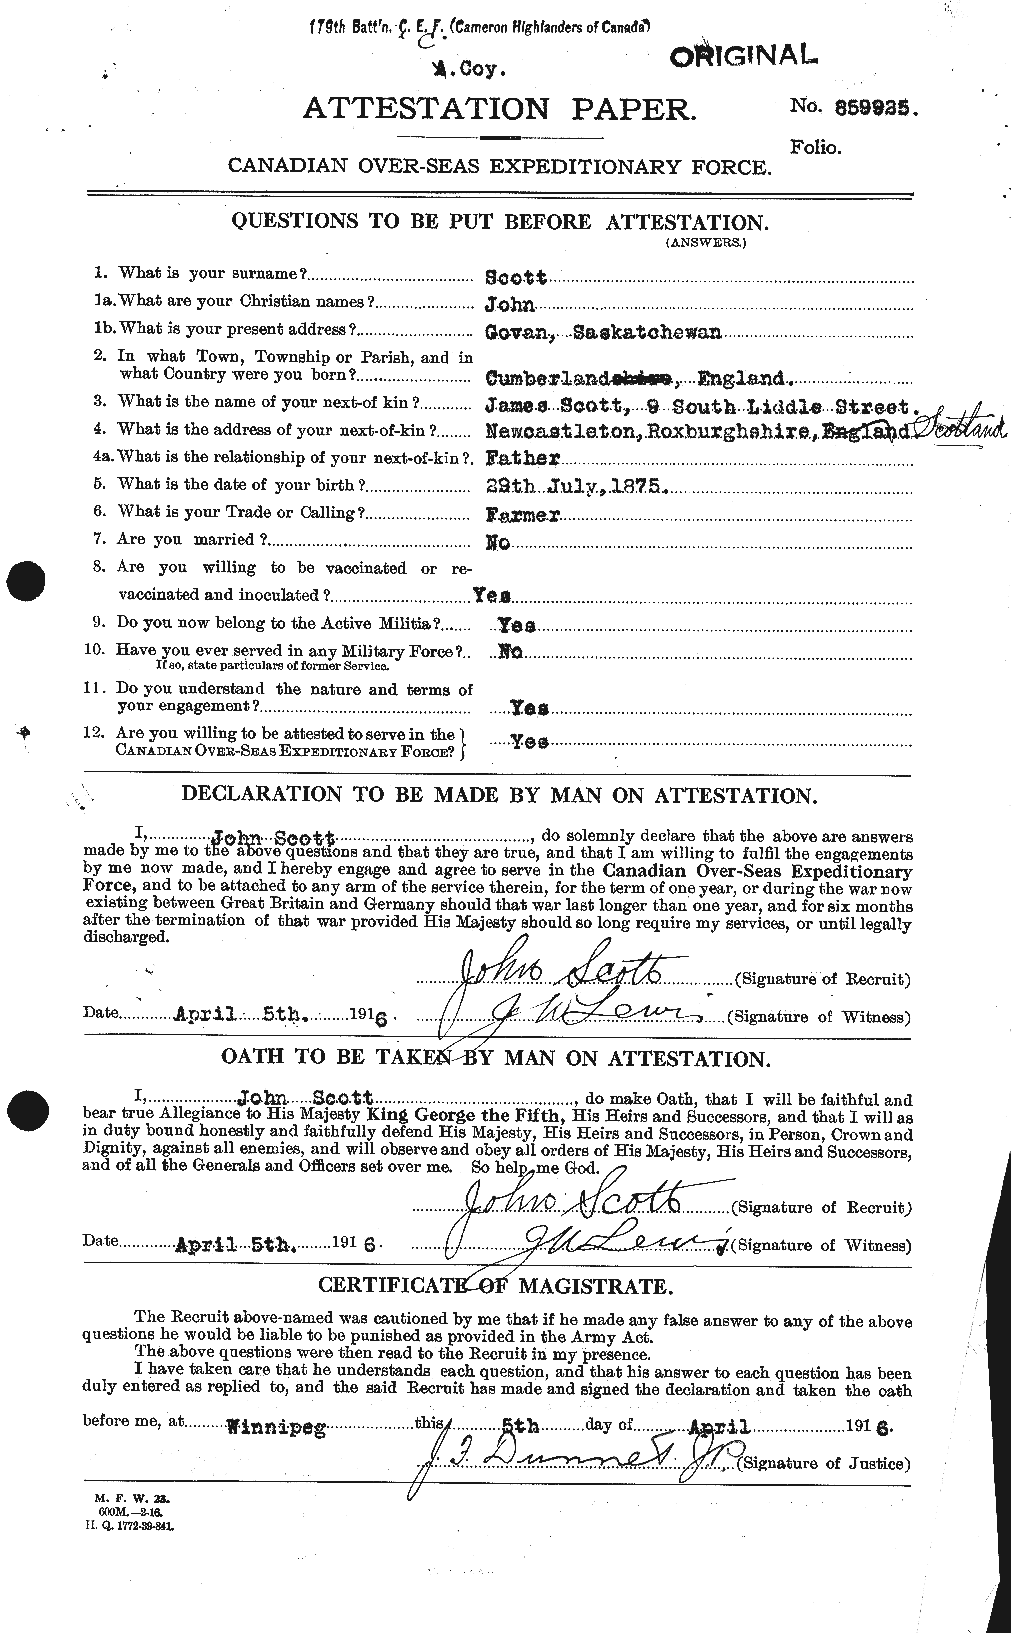 Personnel Records of the First World War - CEF 084937a